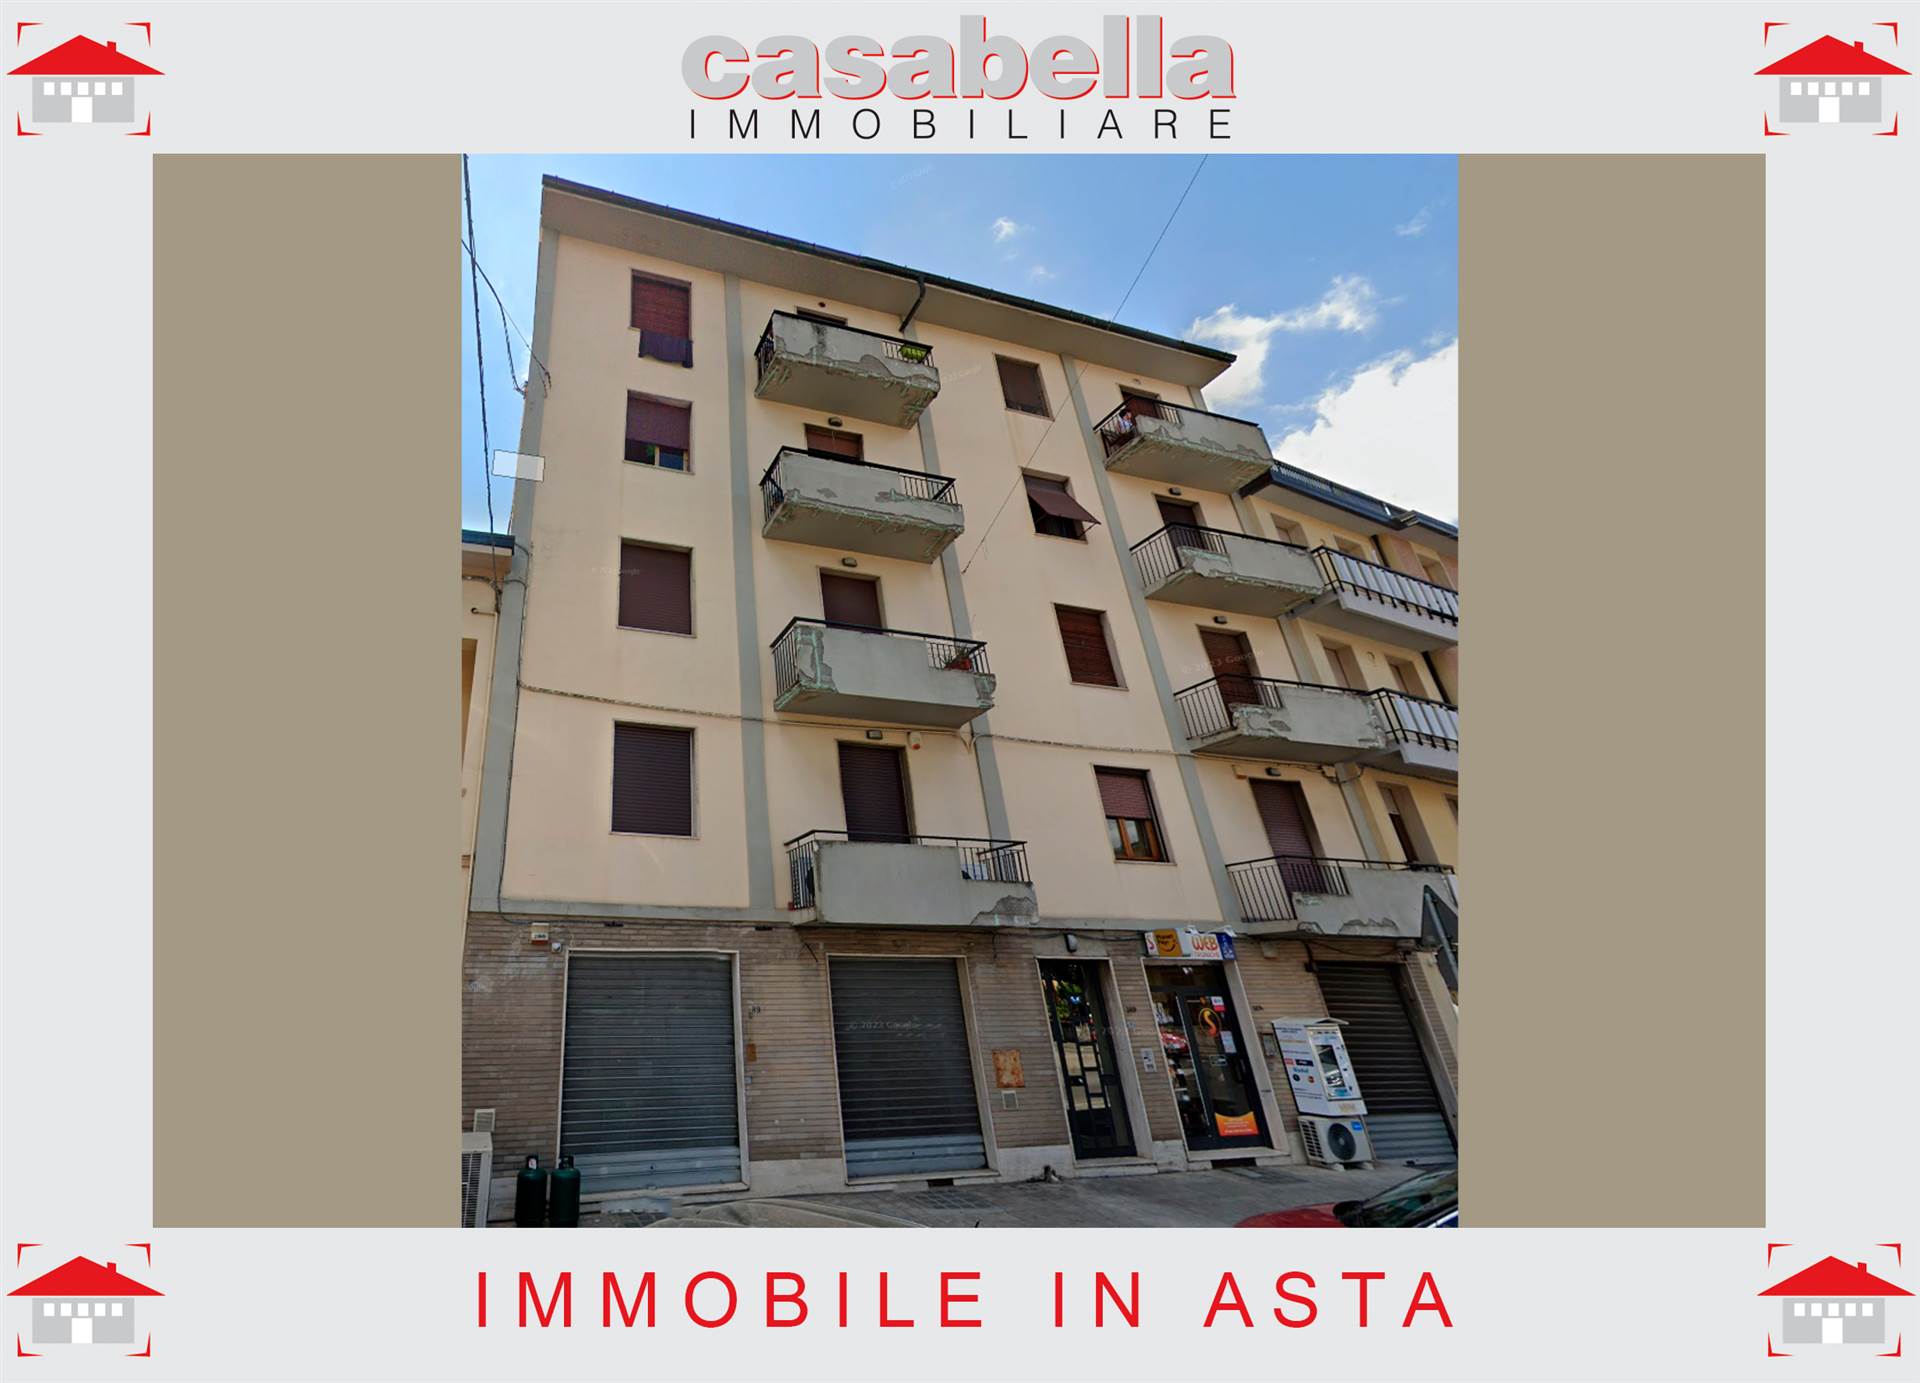 BORGONUOVO, PRATO, Apartment for sale of 103 Sq. mt., Habitable, Heating Individual heating system, Energetic class: G, placed at 4°, composed by: 5 